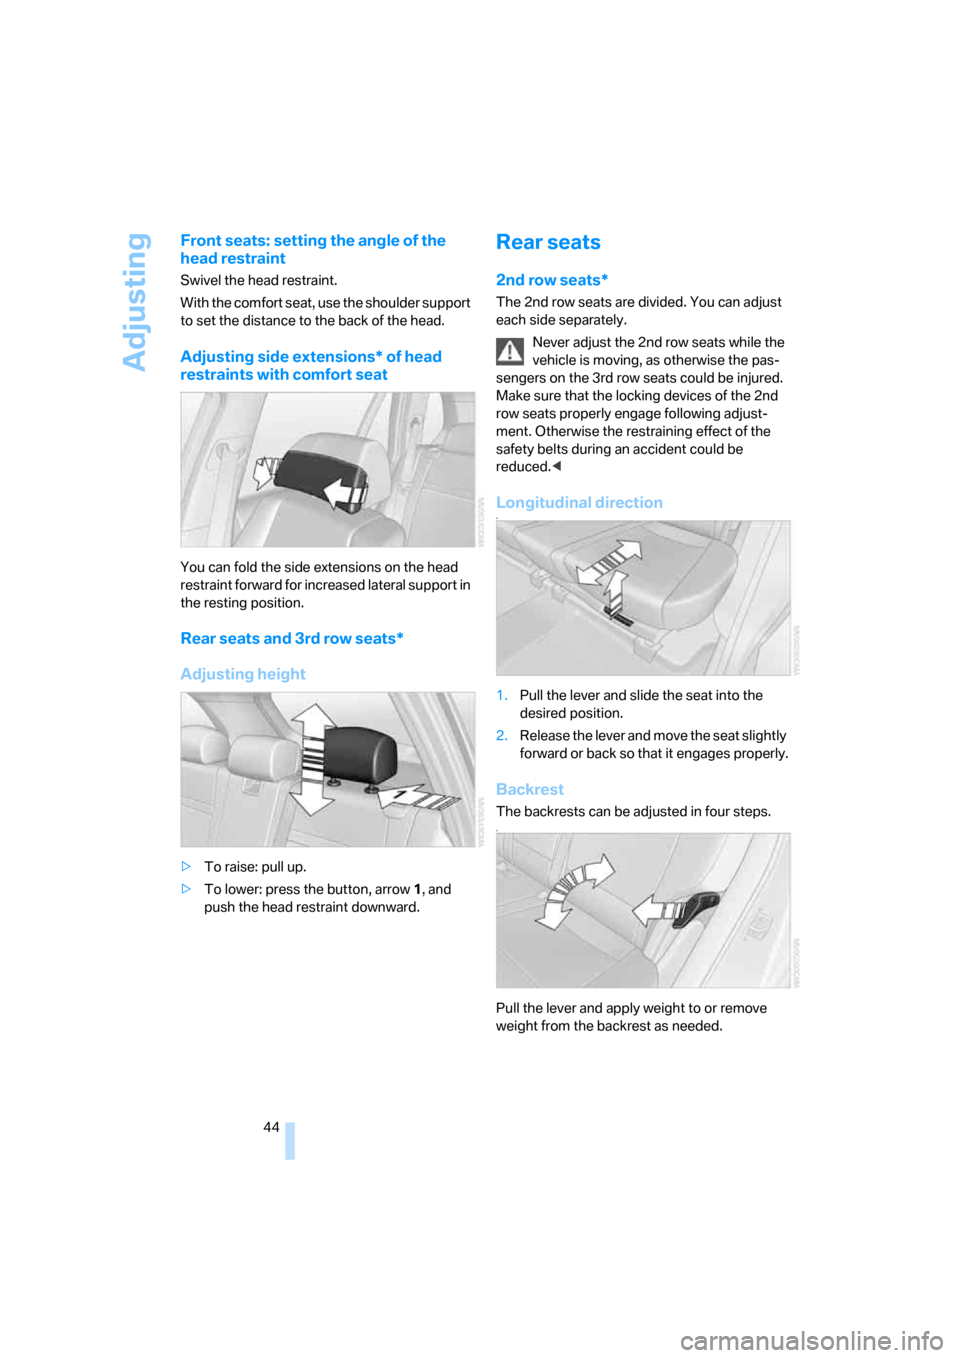 BMW X5 3.0I 2007 E70 Service Manual Adjusting
44
Front seats: setting the angle of the 
head restraint
Swivel the head restraint.
With the comfort seat, use the shoulder support 
to set the distance to the back of the head.
Adjusting si